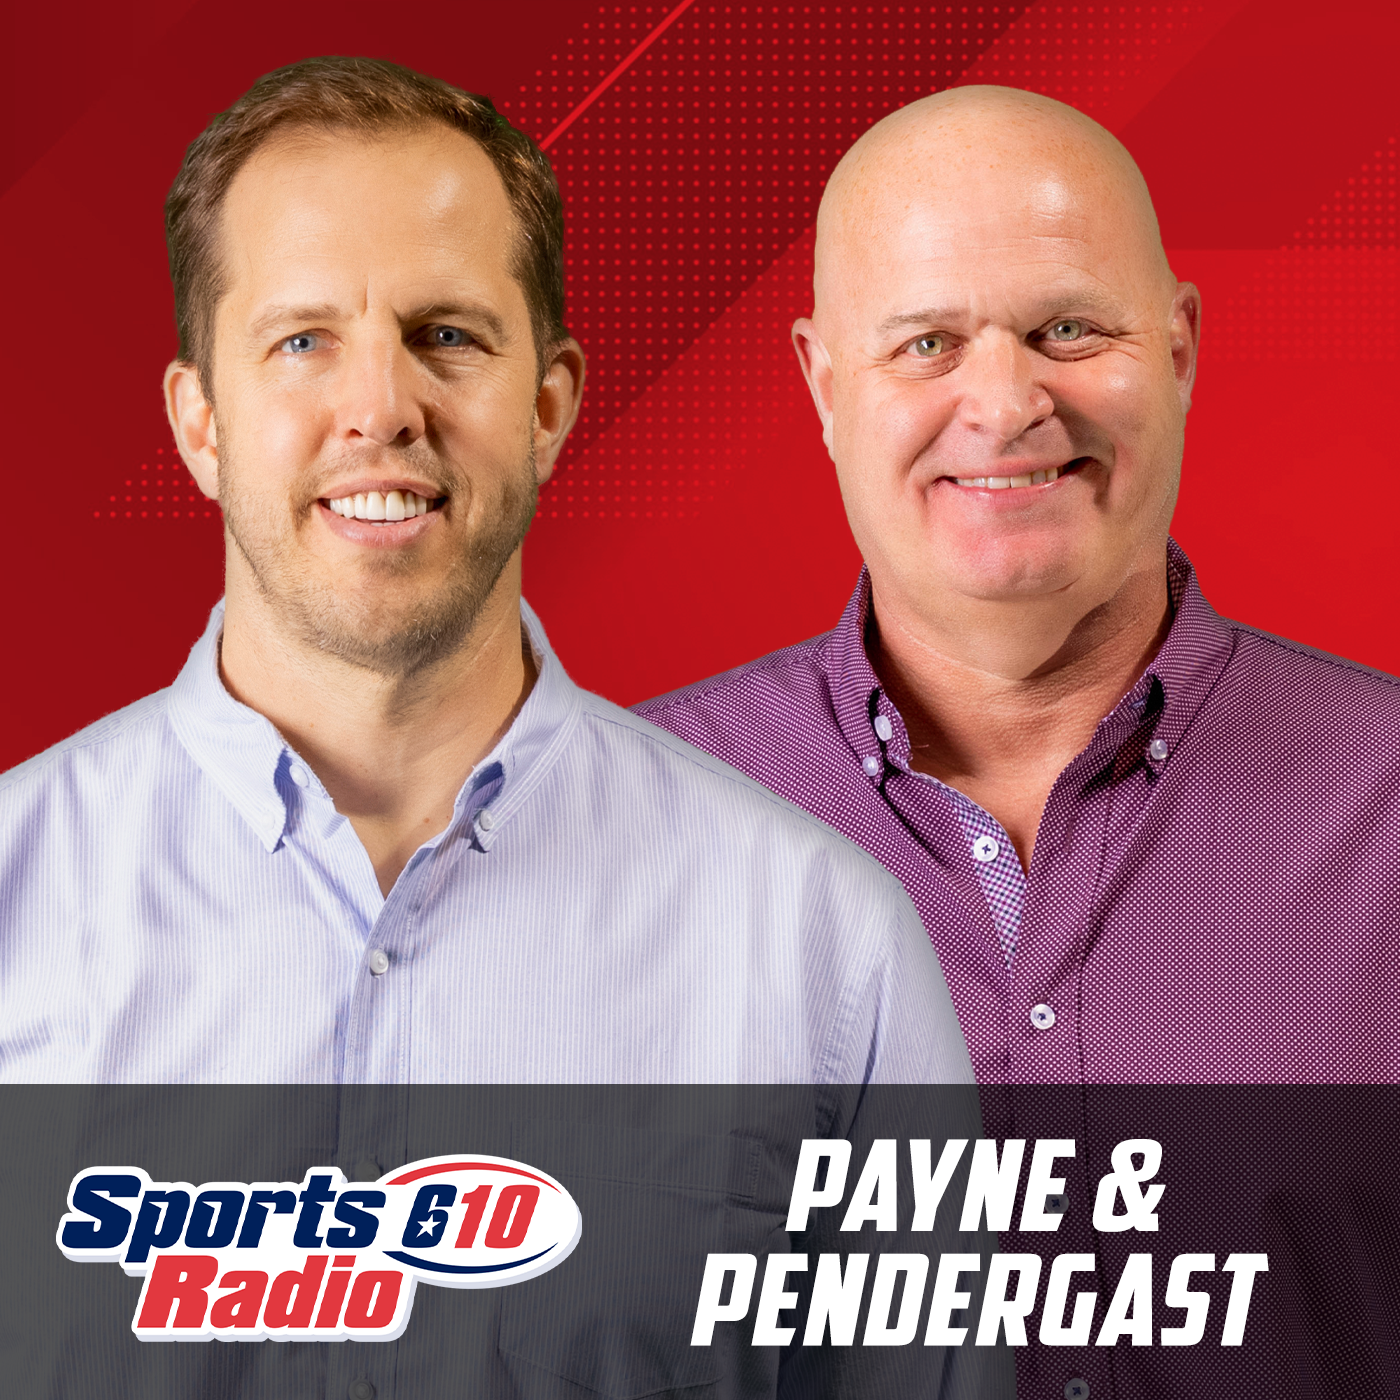 Payne & Pendergast Hour 3: We Were All Way Off with Our Watt Prediction